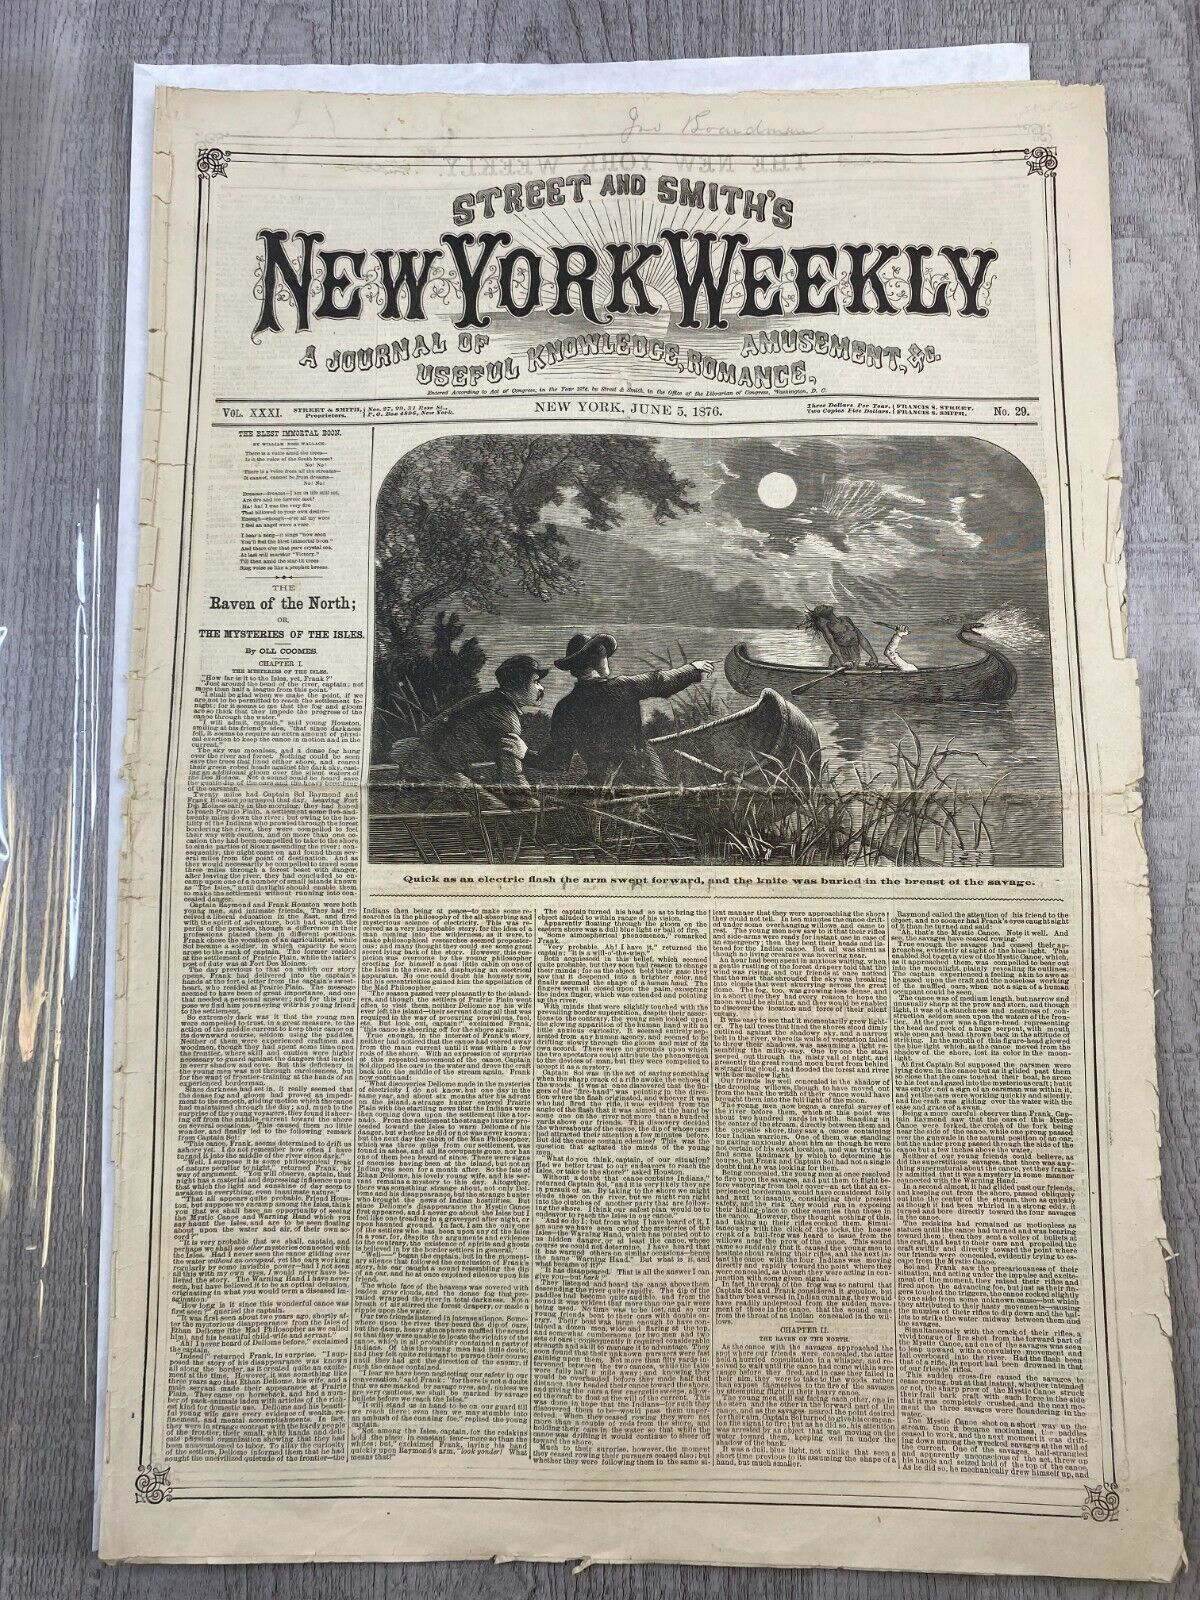 Street and Smith\'s NEW YORK WEEKLY Vintage Newspaper June 5, 1876 No. 29 Stories